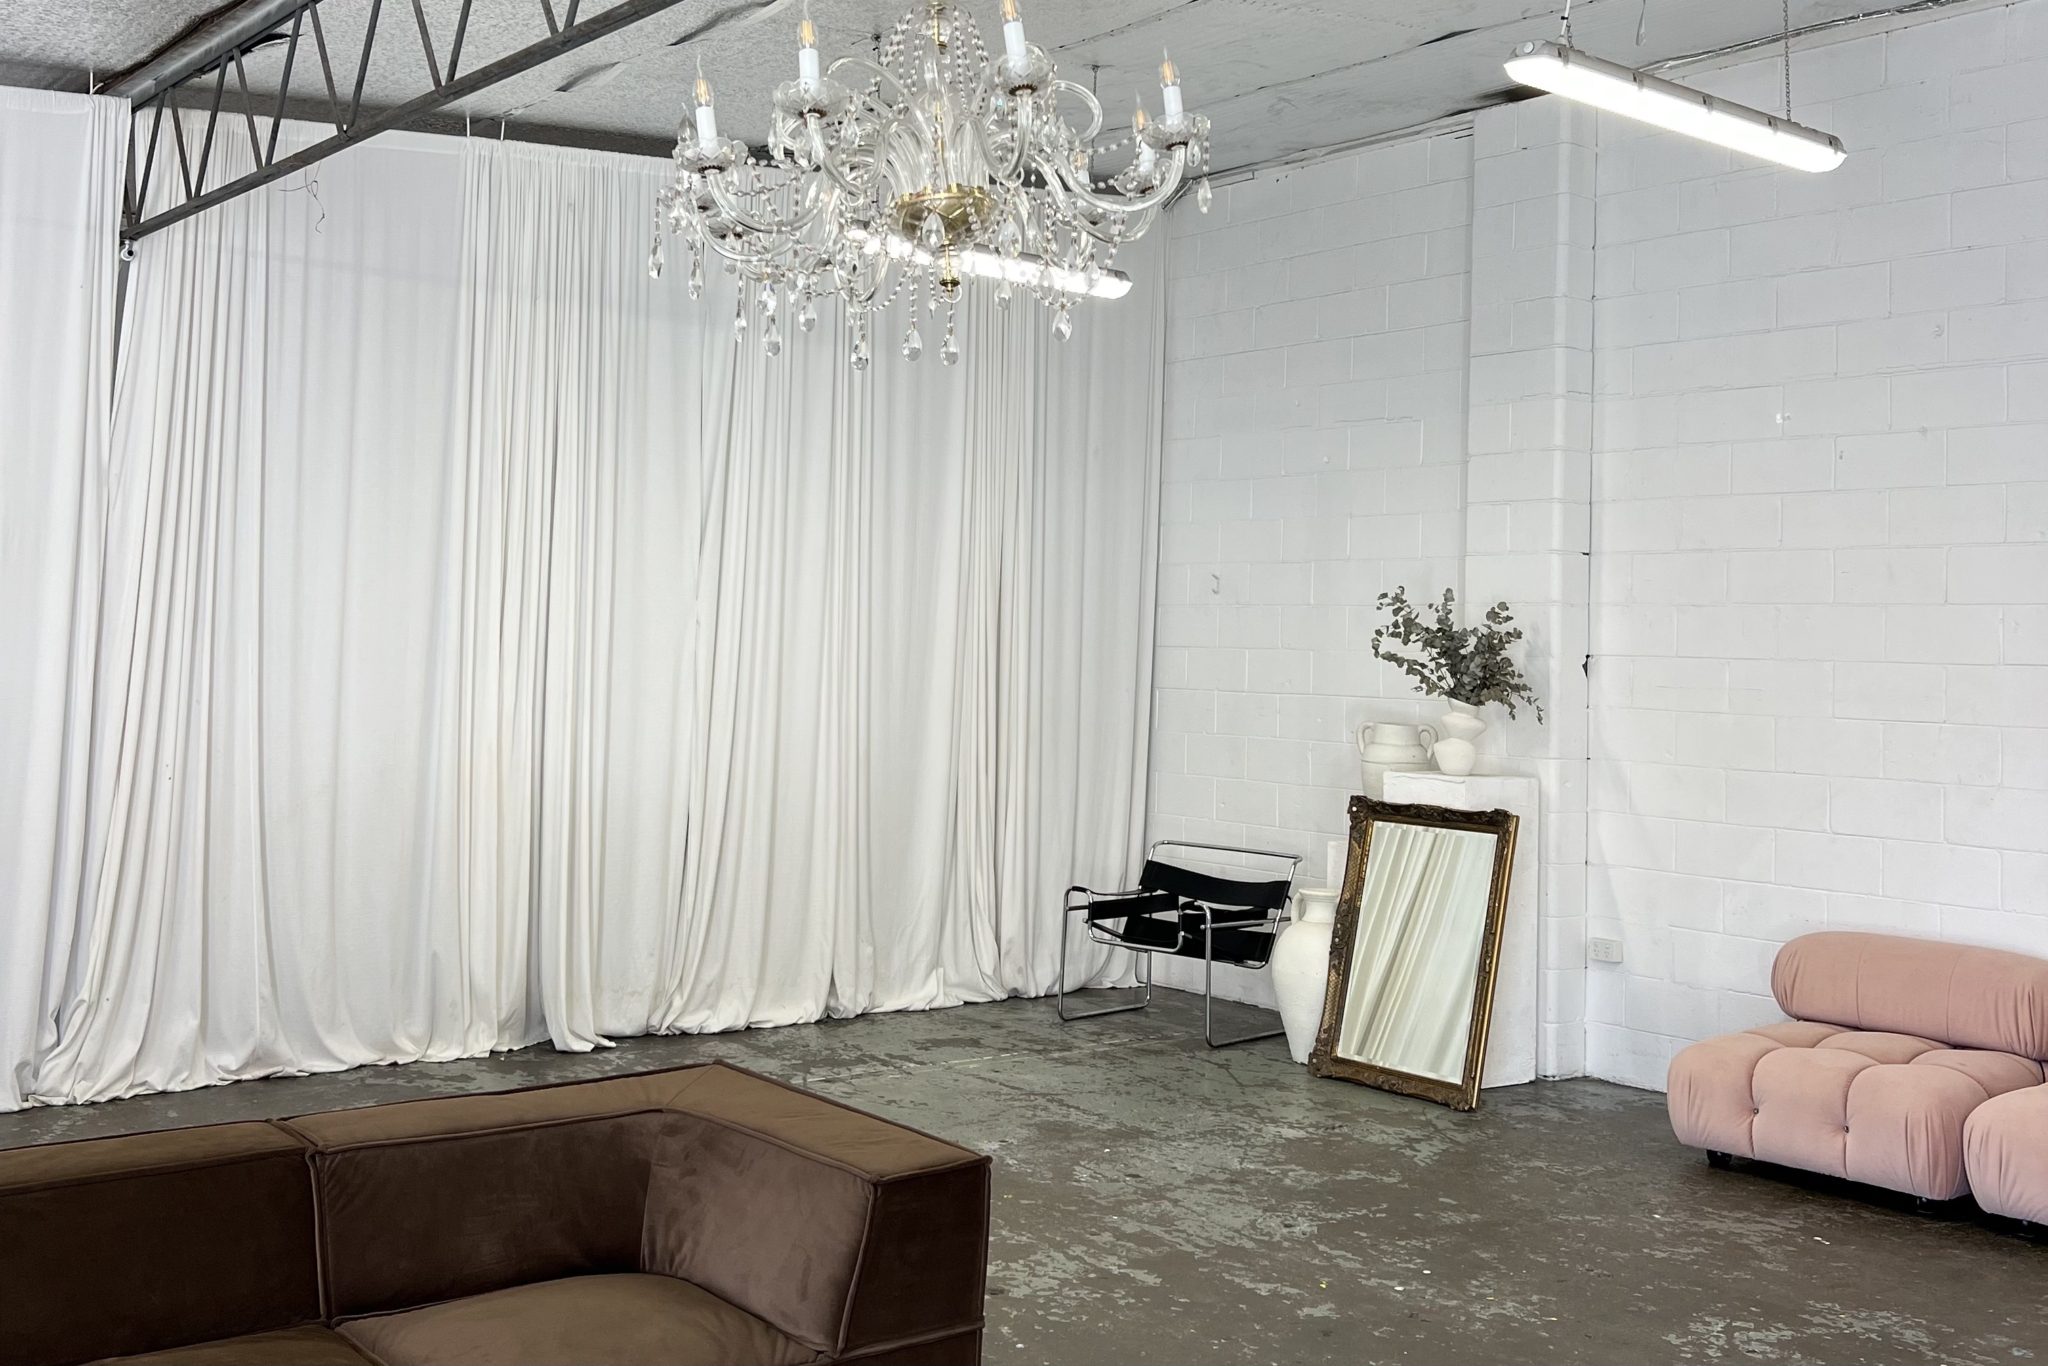 Natural Light Studio – Photoshoot & Event Space